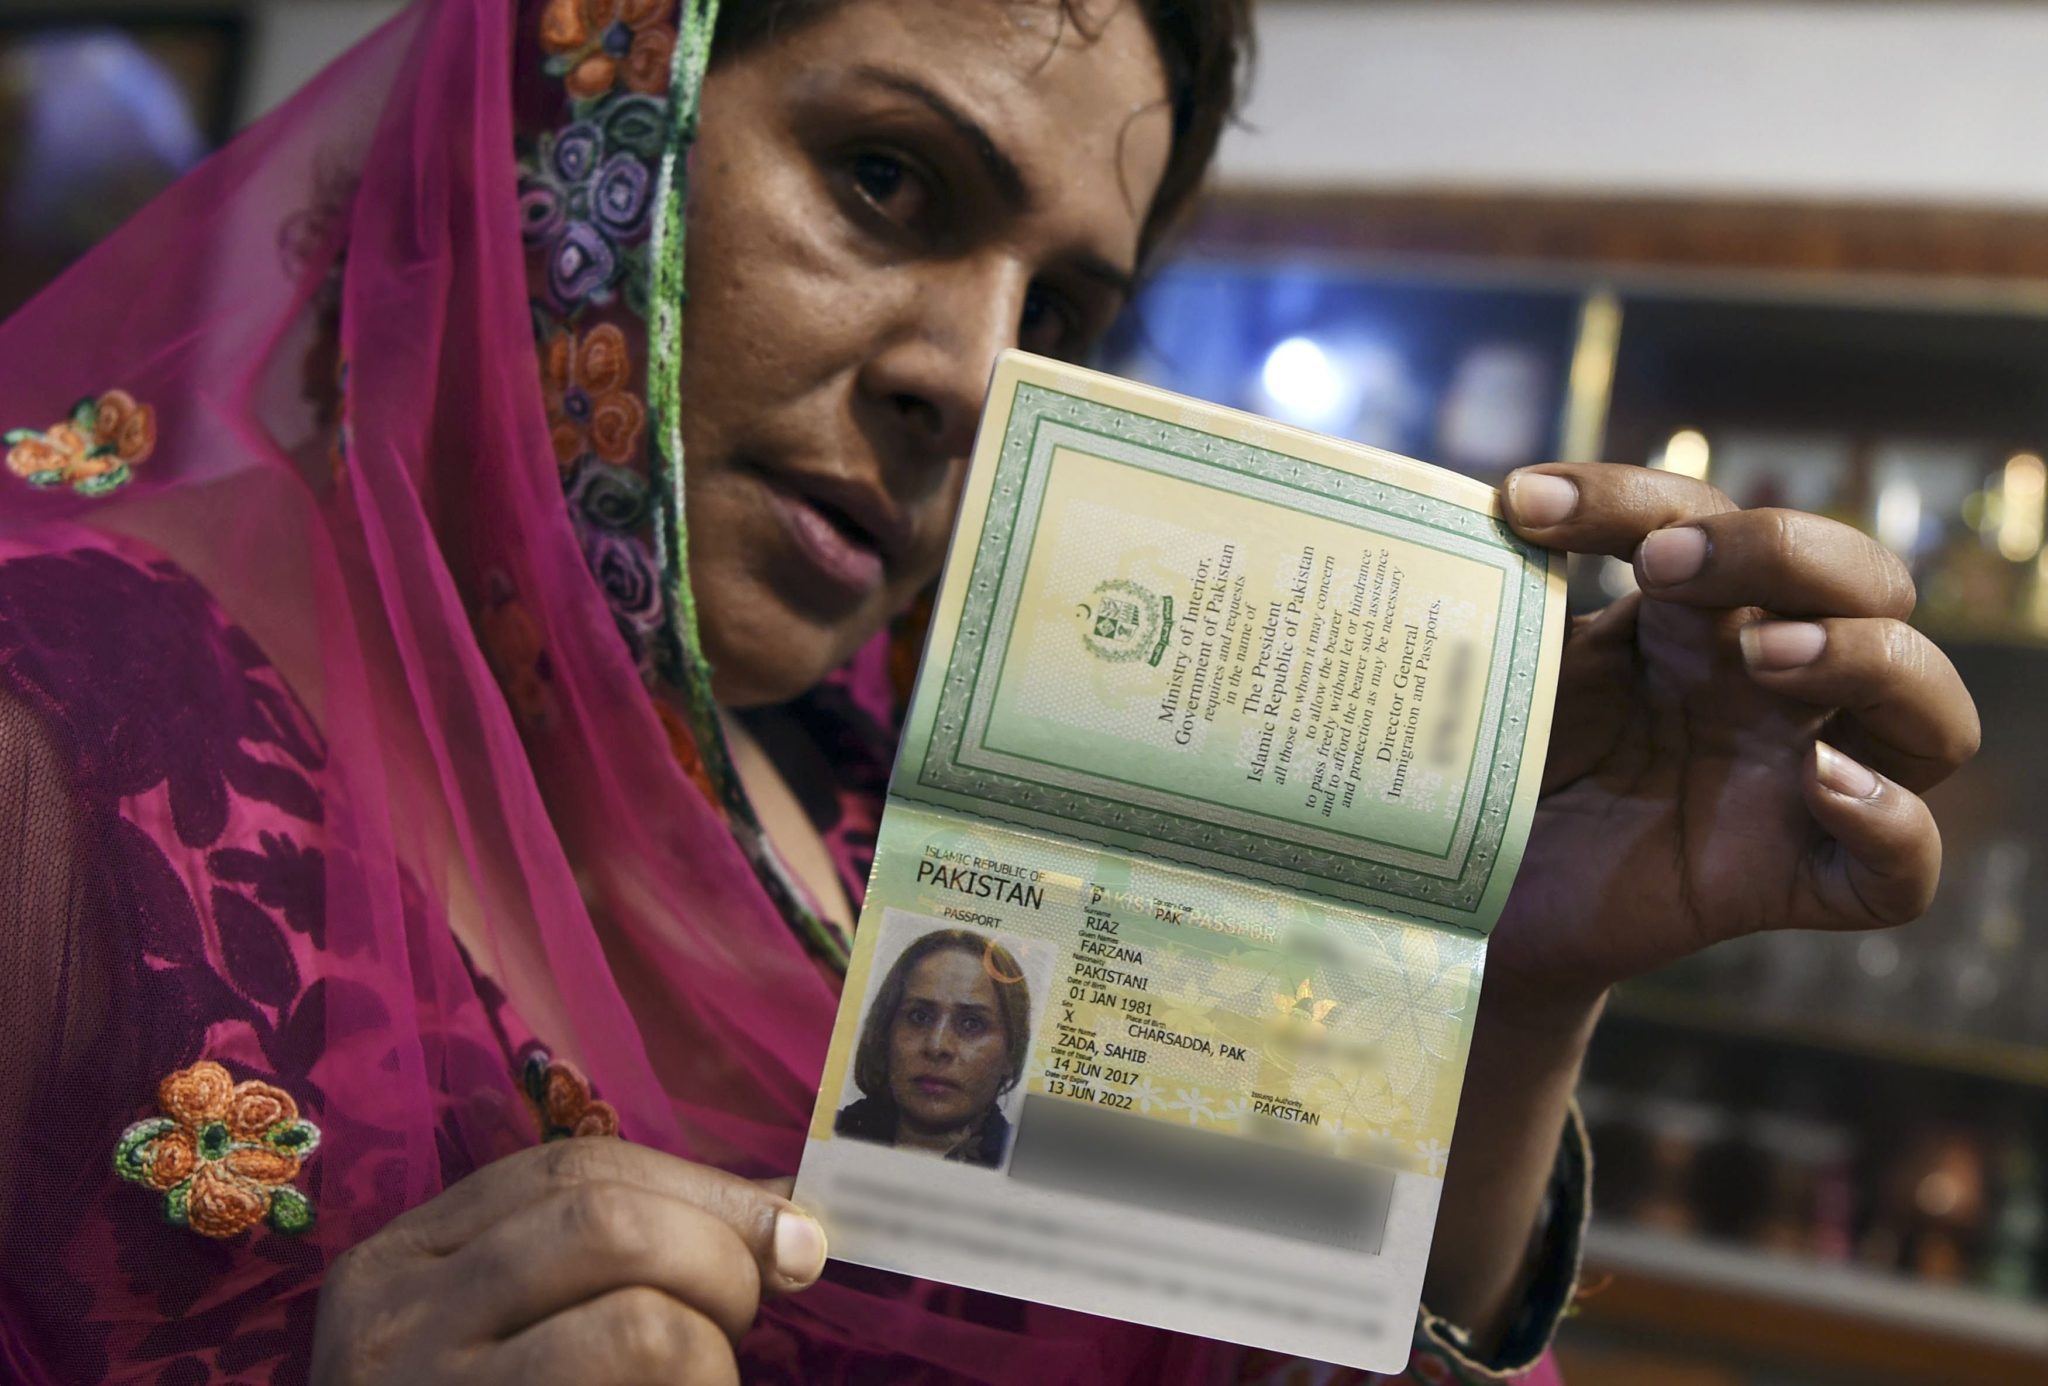 Pakistan Issues Its First Transgender Passport, Includes X As Gender Category